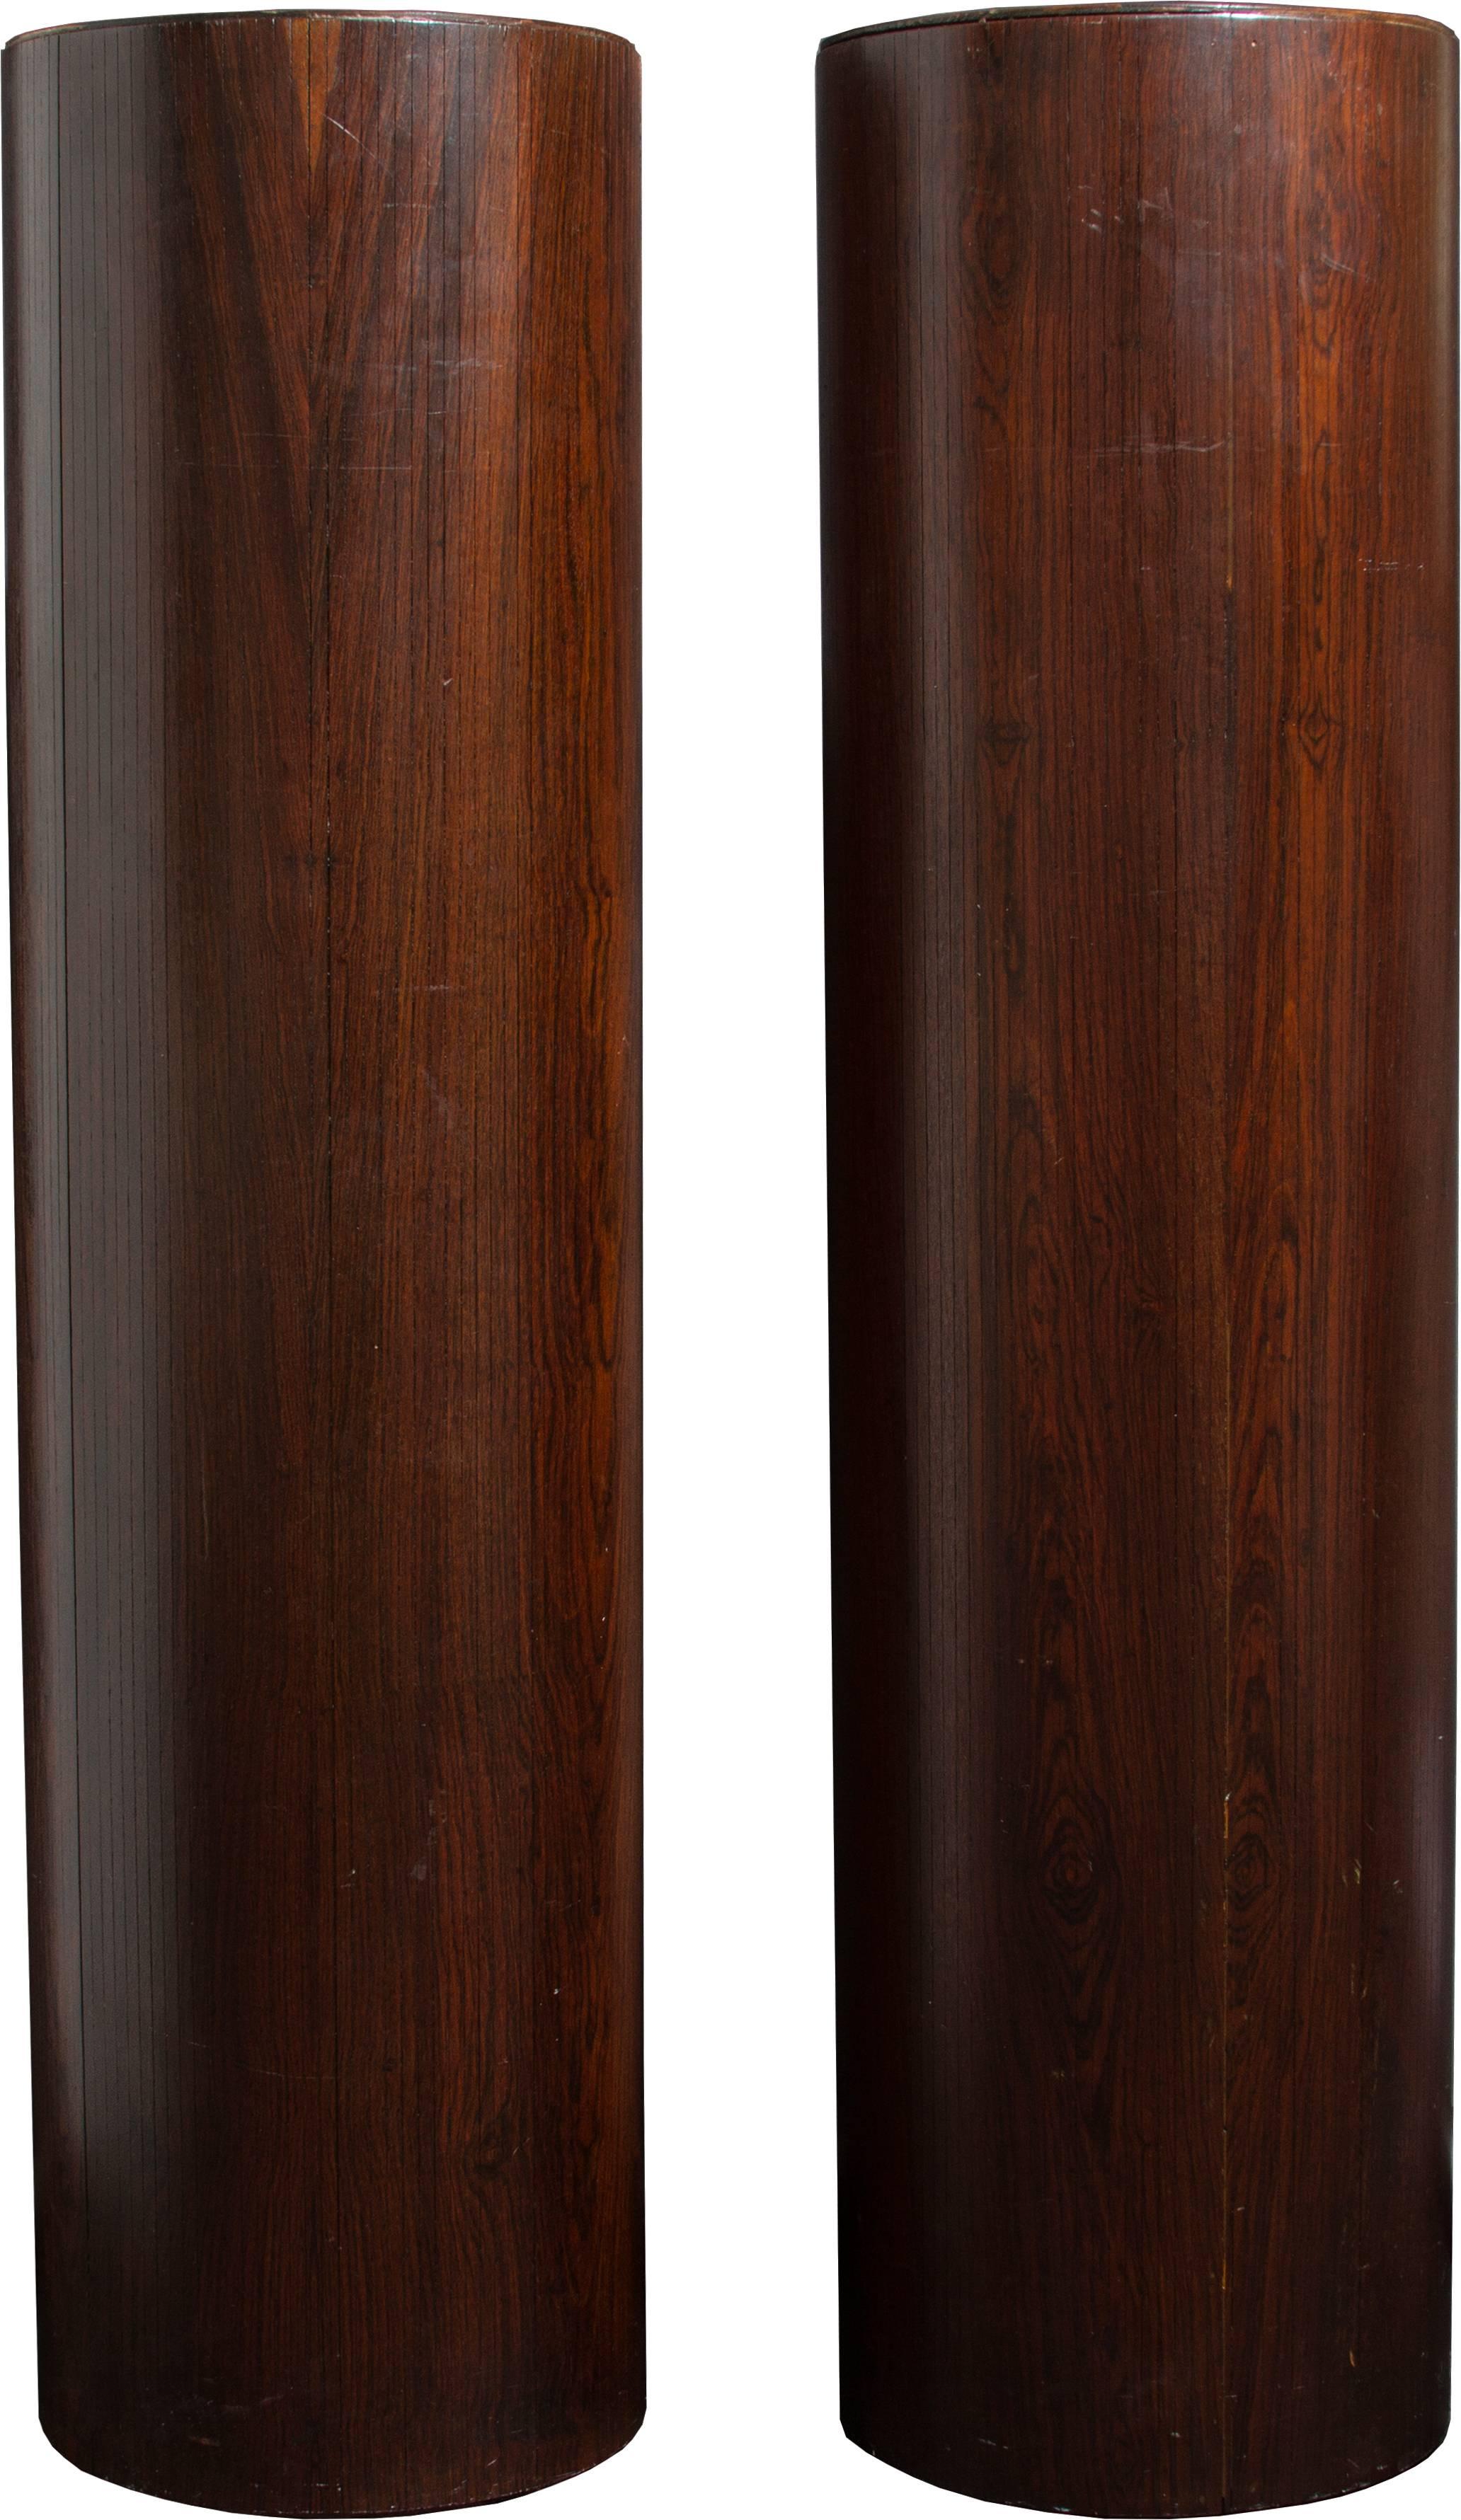 These are a simple and elegant pair of pedestals with a zebrawood veneer.